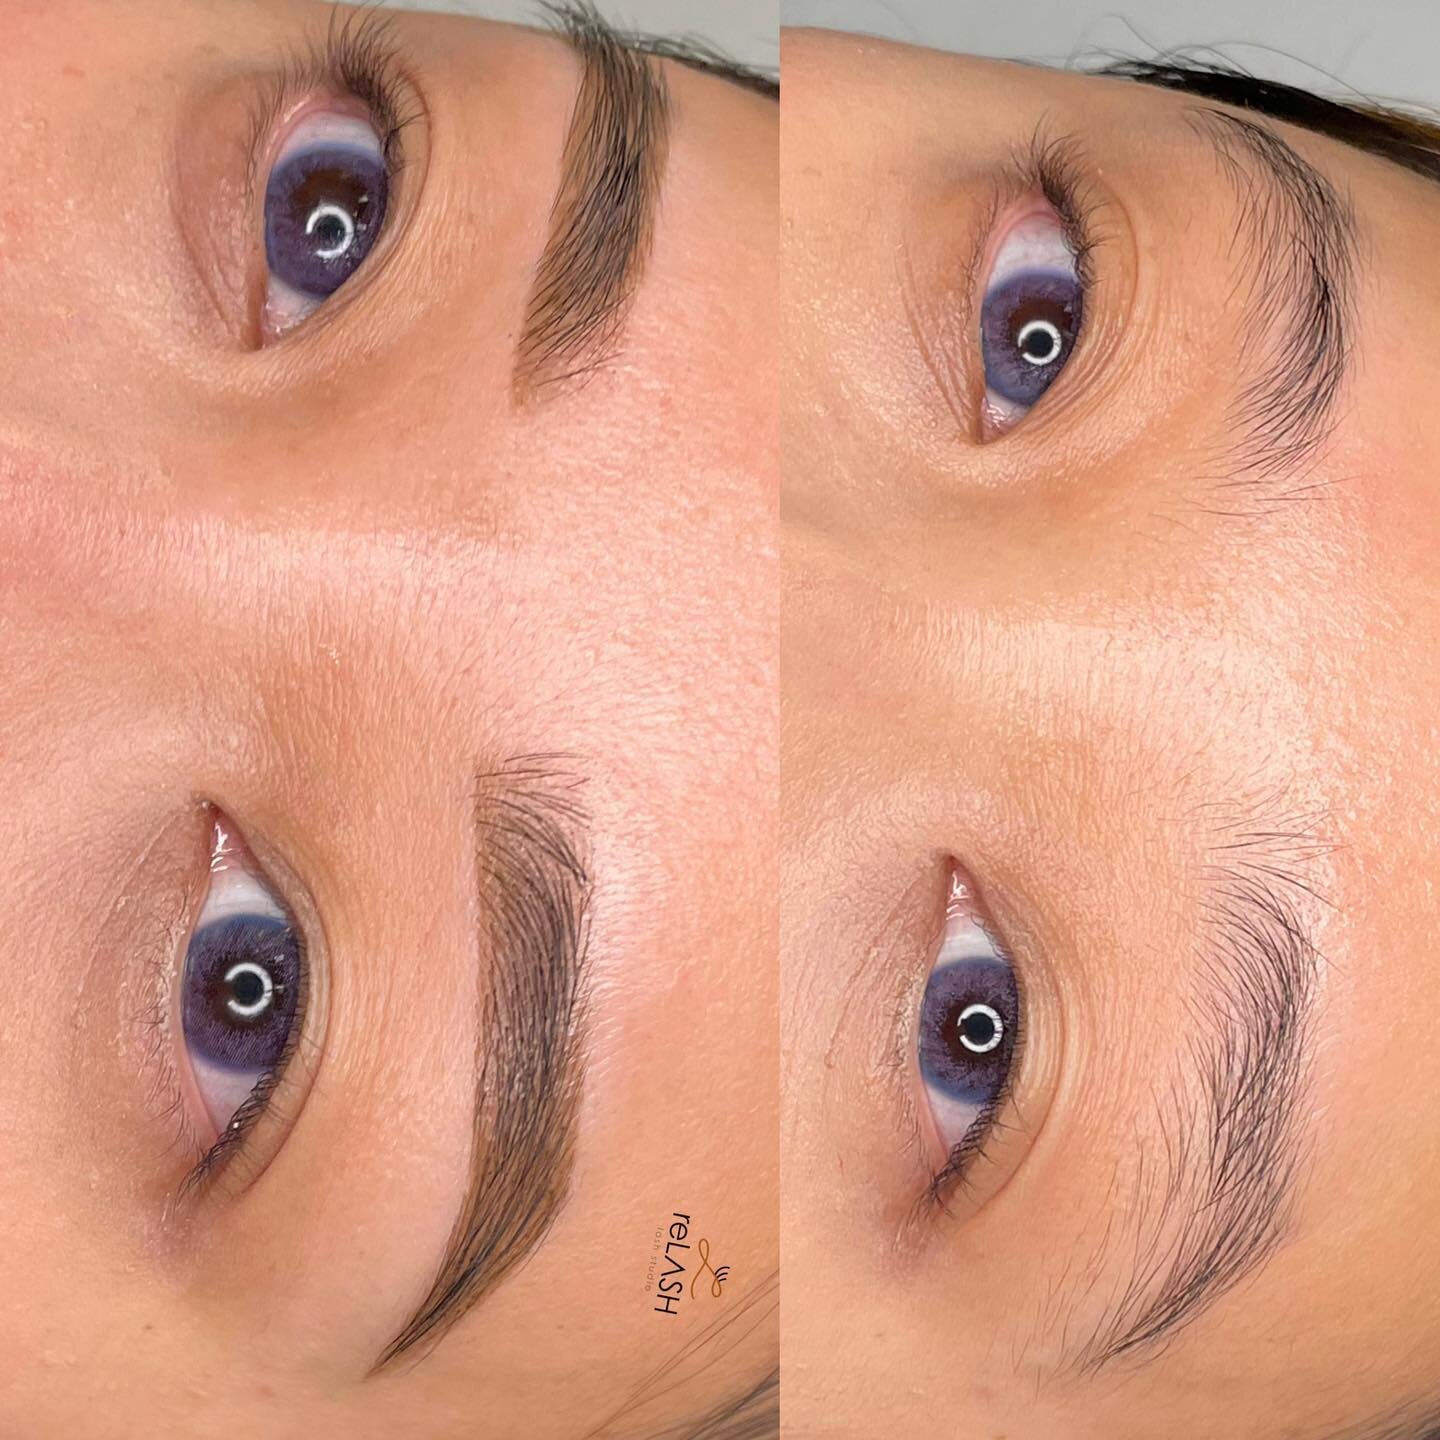 Brow Tint + Brow Shape 🪄

Bronsun the first extra long lasting eyebrow and eyelash gel dye with henna effect now available! 

To create this beautiful defined soft powder finish I used Bronsun 5+6.

Have you been wanting to try this service and have